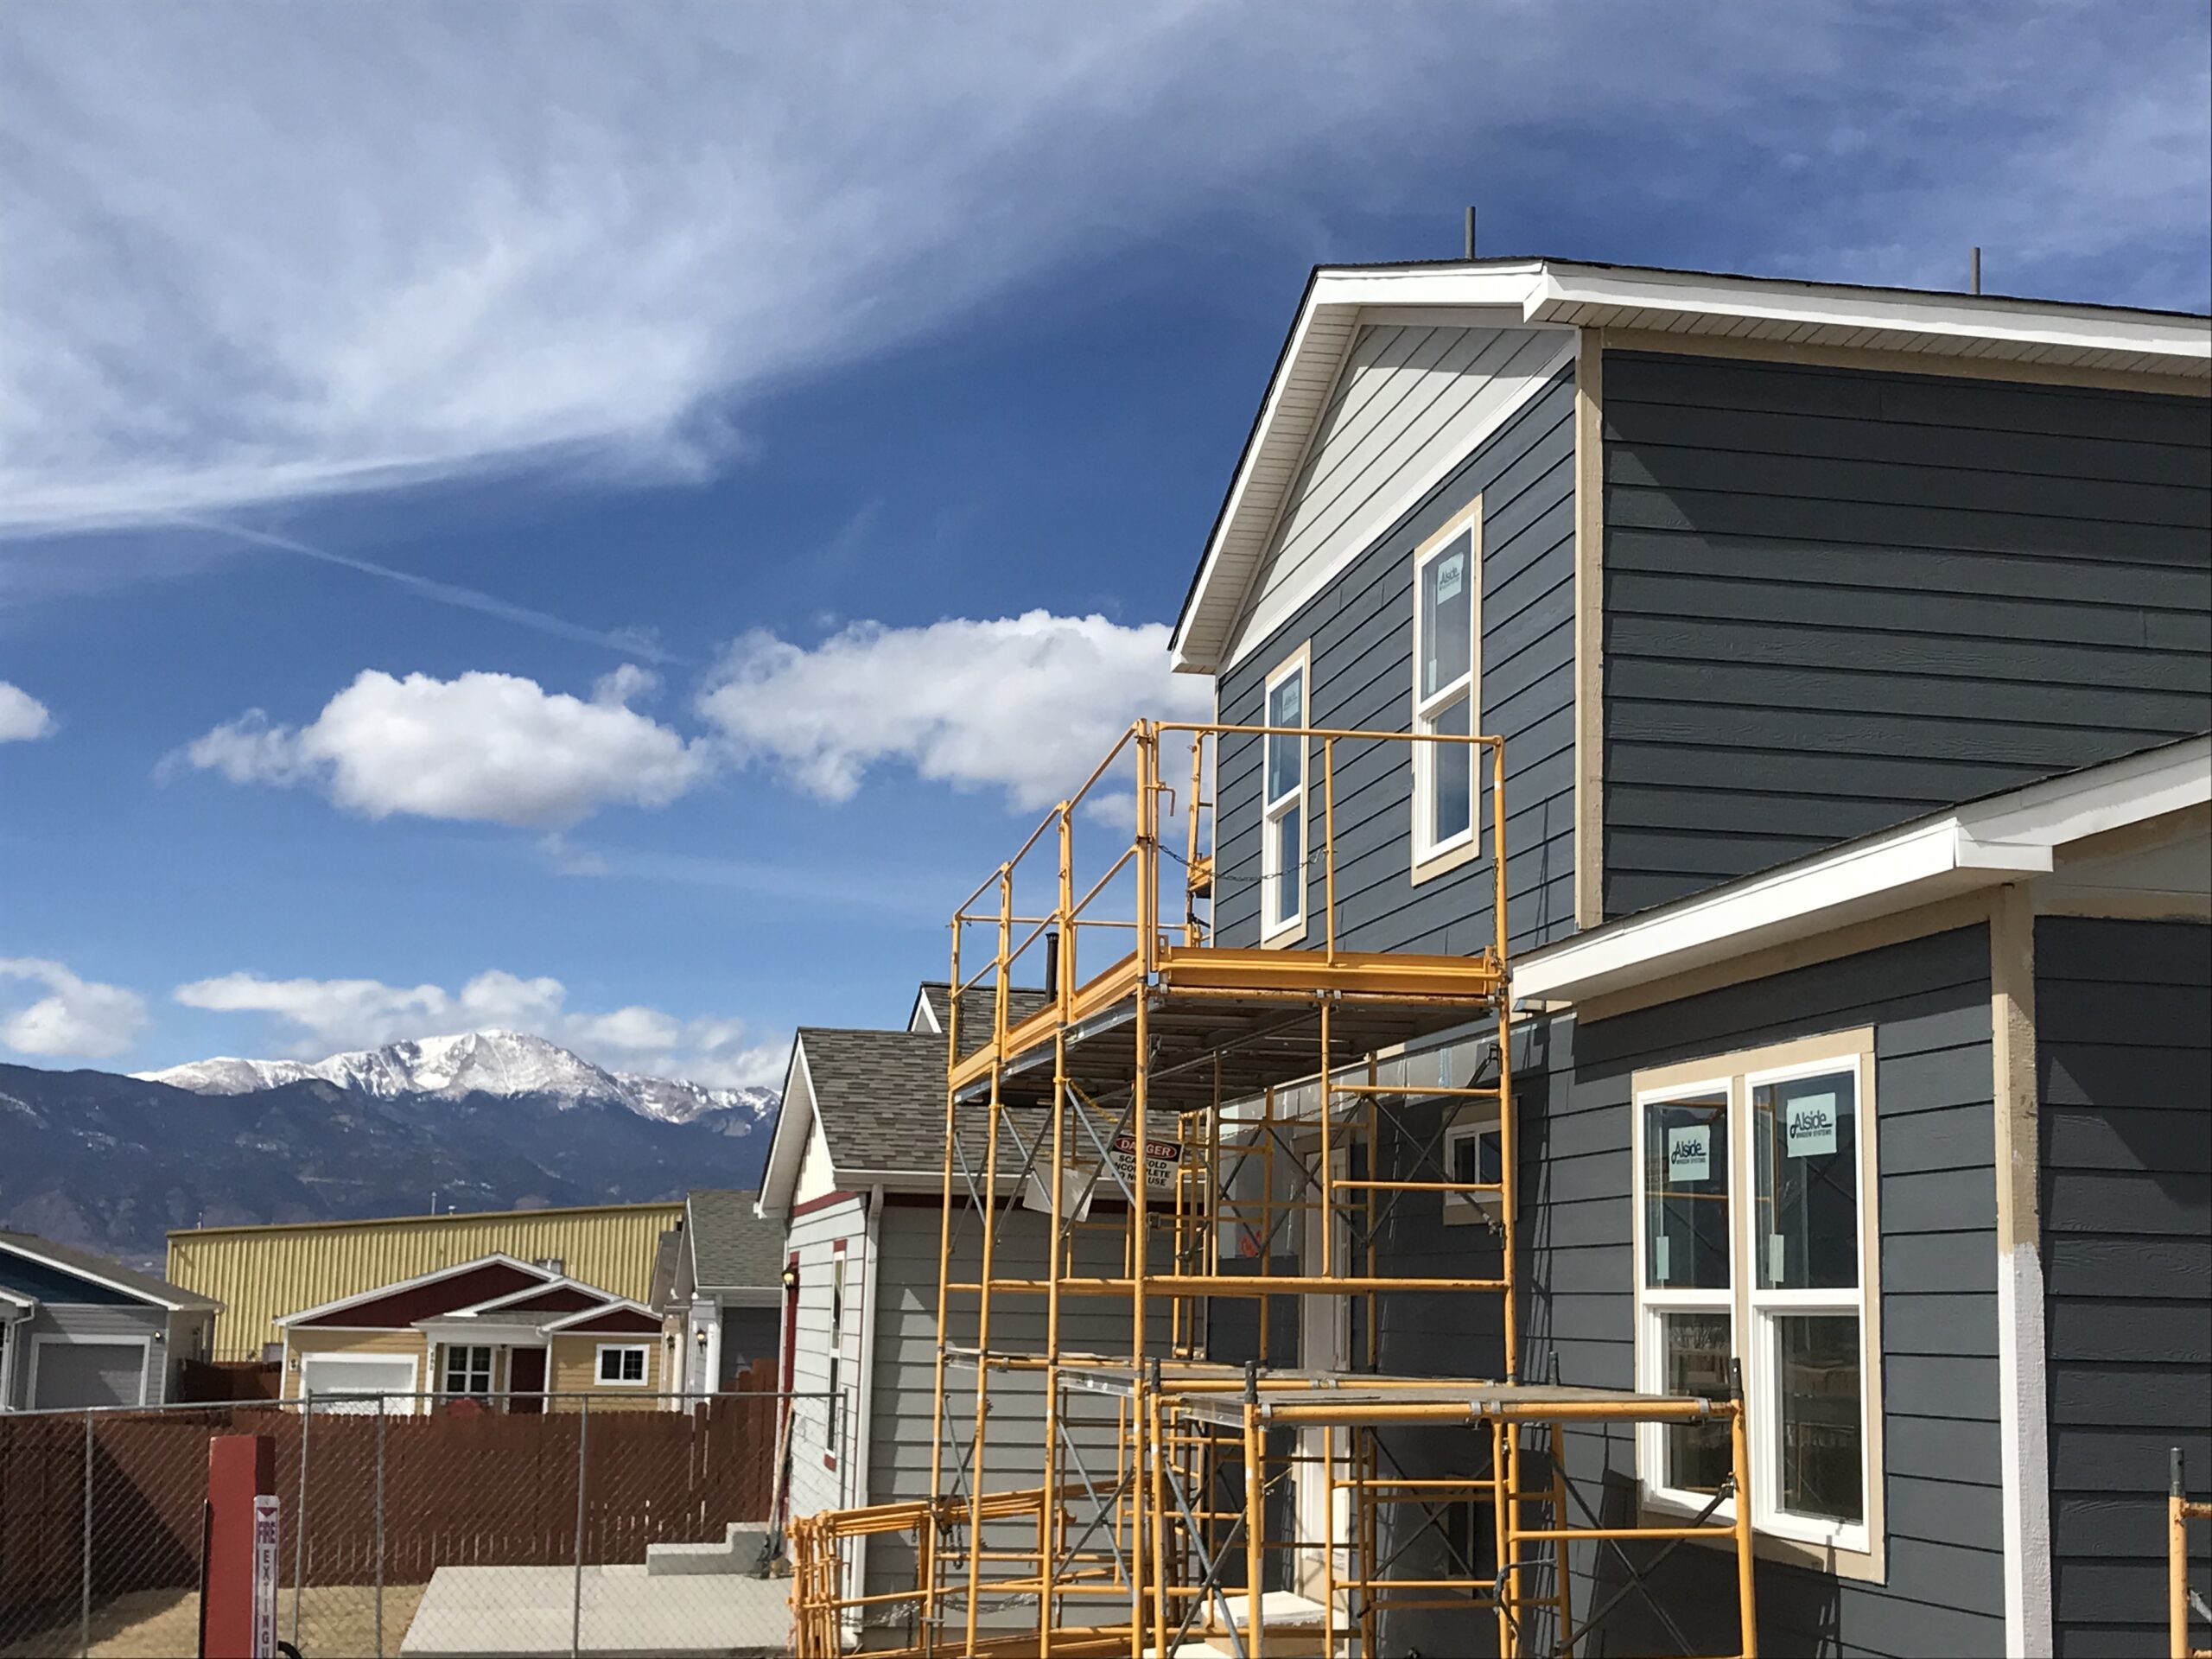 House with scaffolding and mountains in background